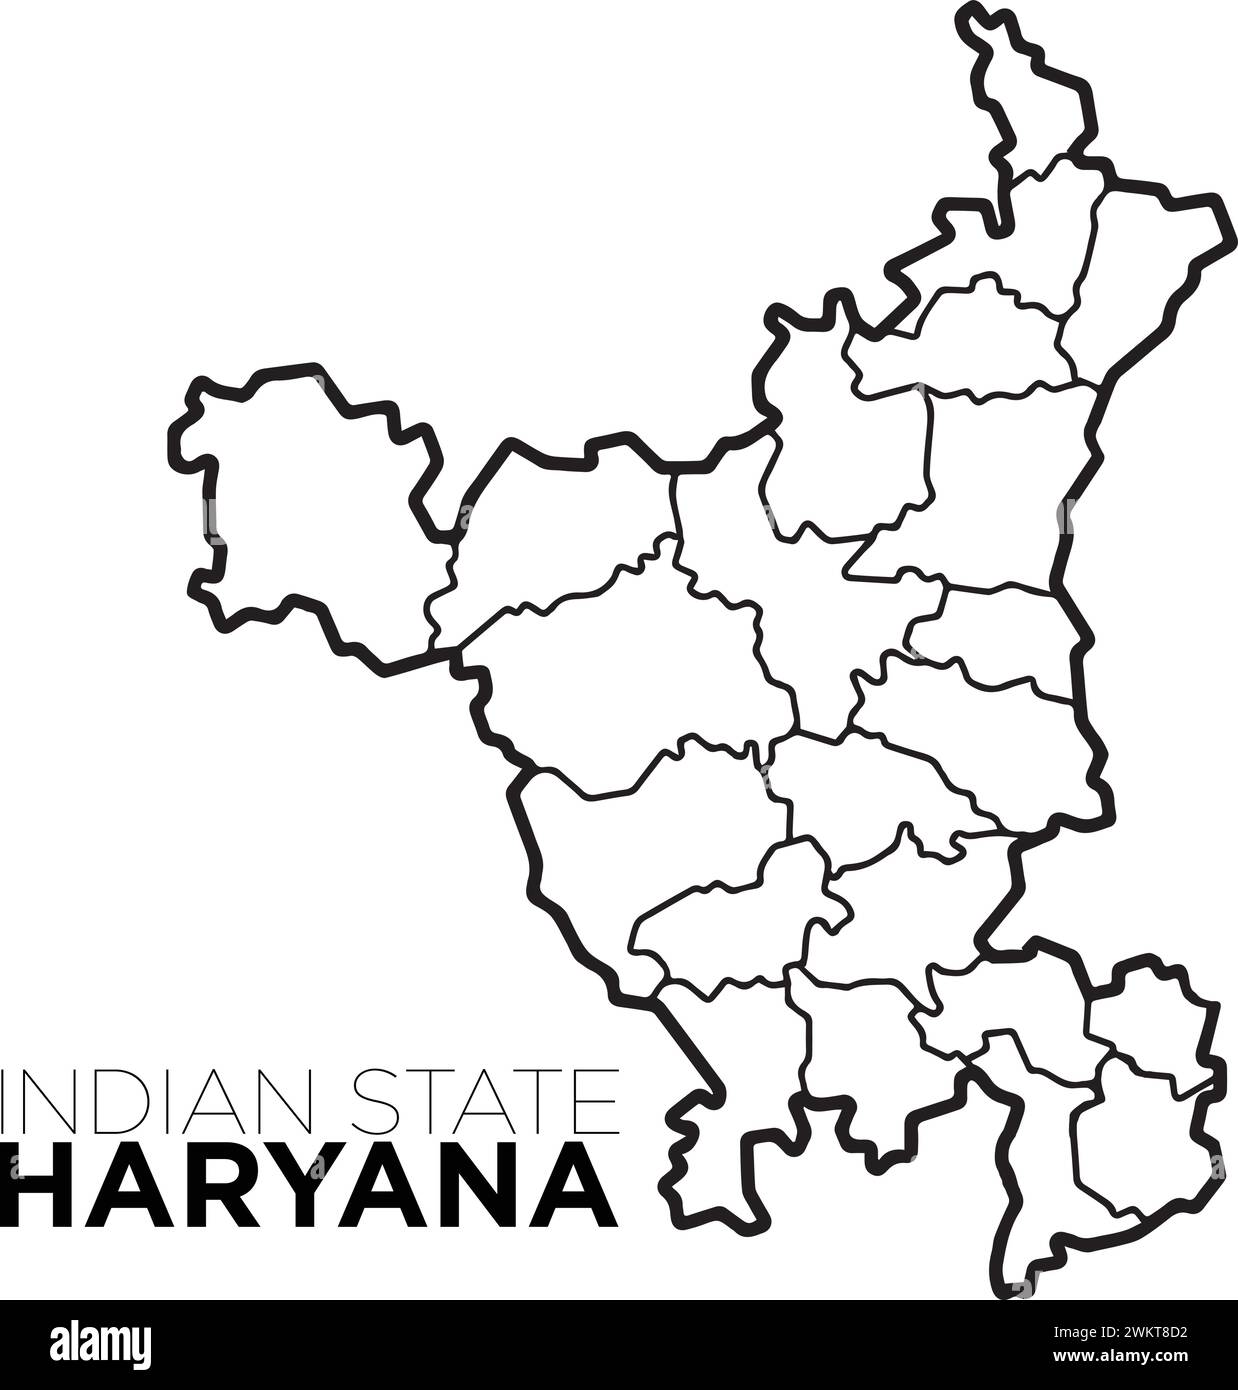 Indian map haryana map with district illustration vecor, distrtict map Stock Vector